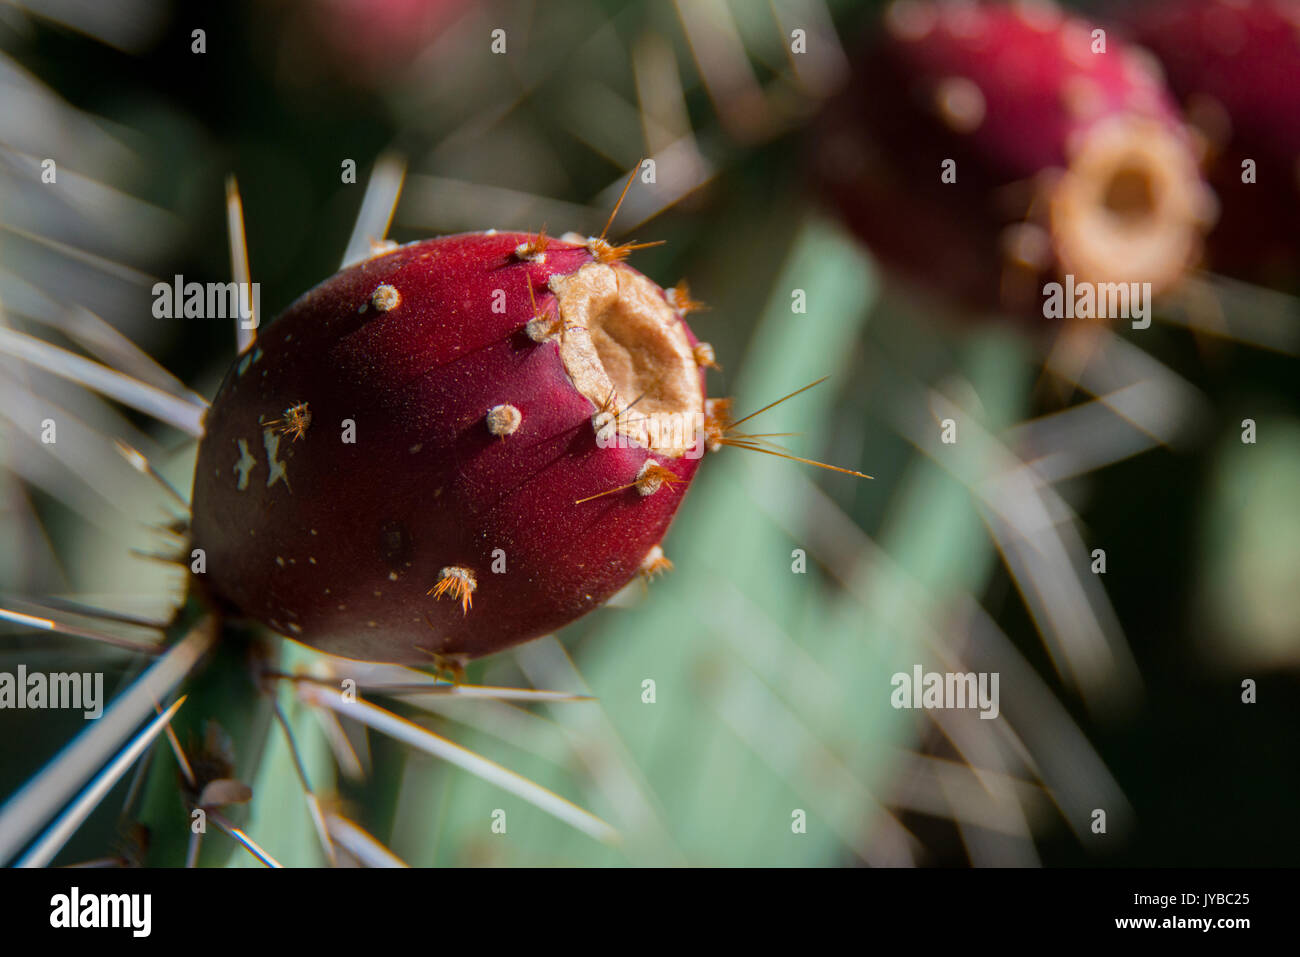 Prickly Pear Fruit Stock Photo